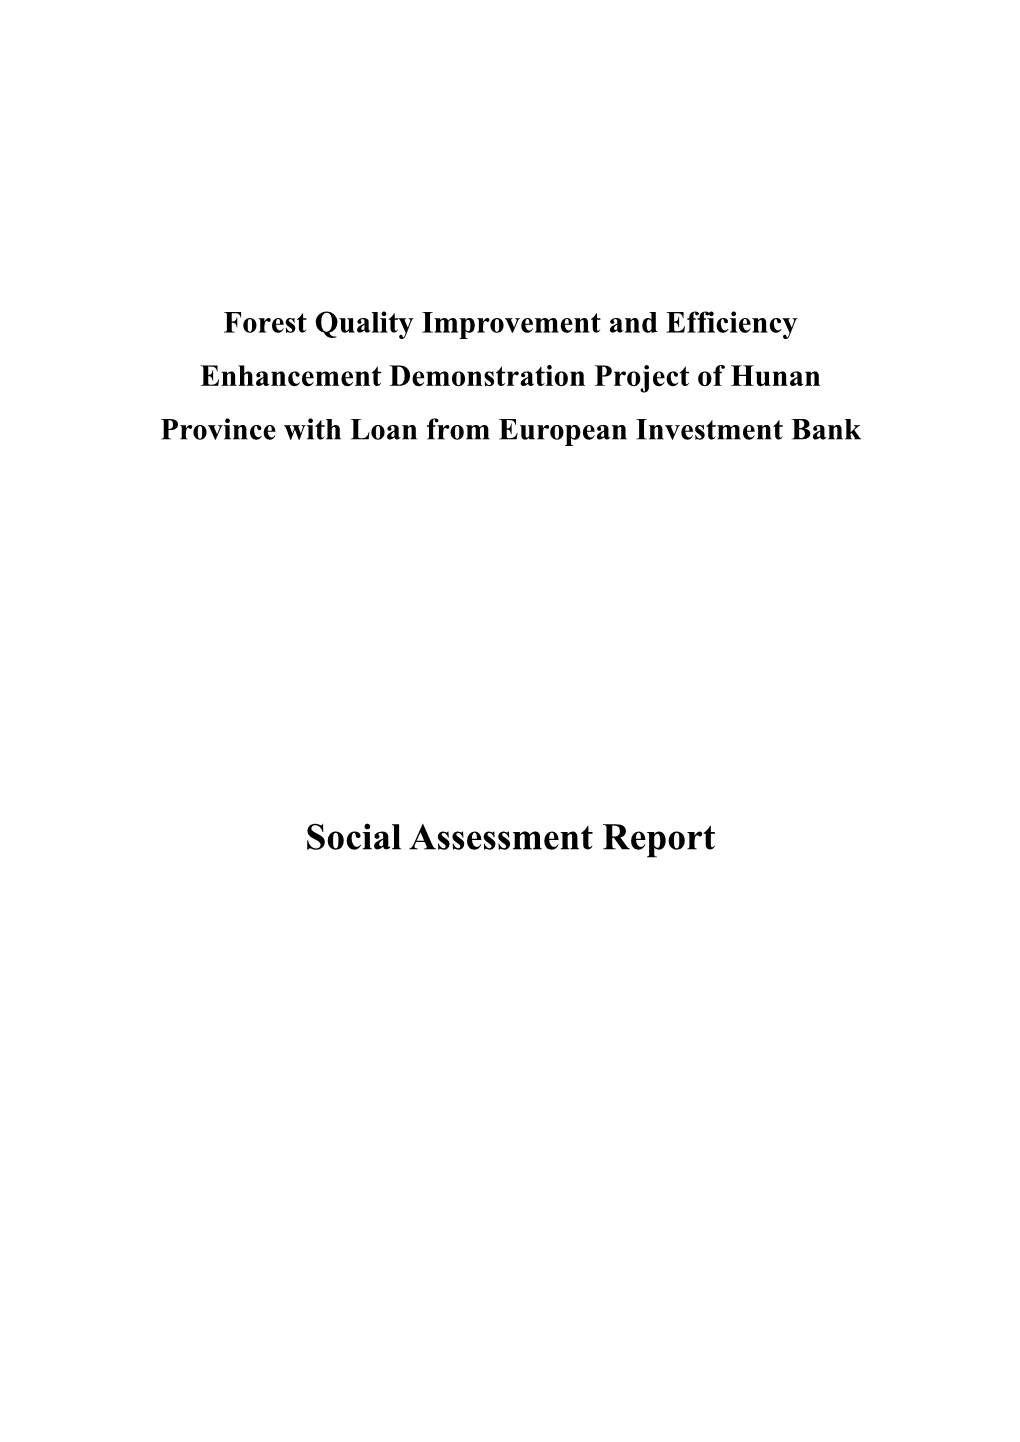 Alternative Menu of Forest Quality Improvement and Efficiency Enhancement Demonstration Project of Hunan Province with Loan from European Investment Bank